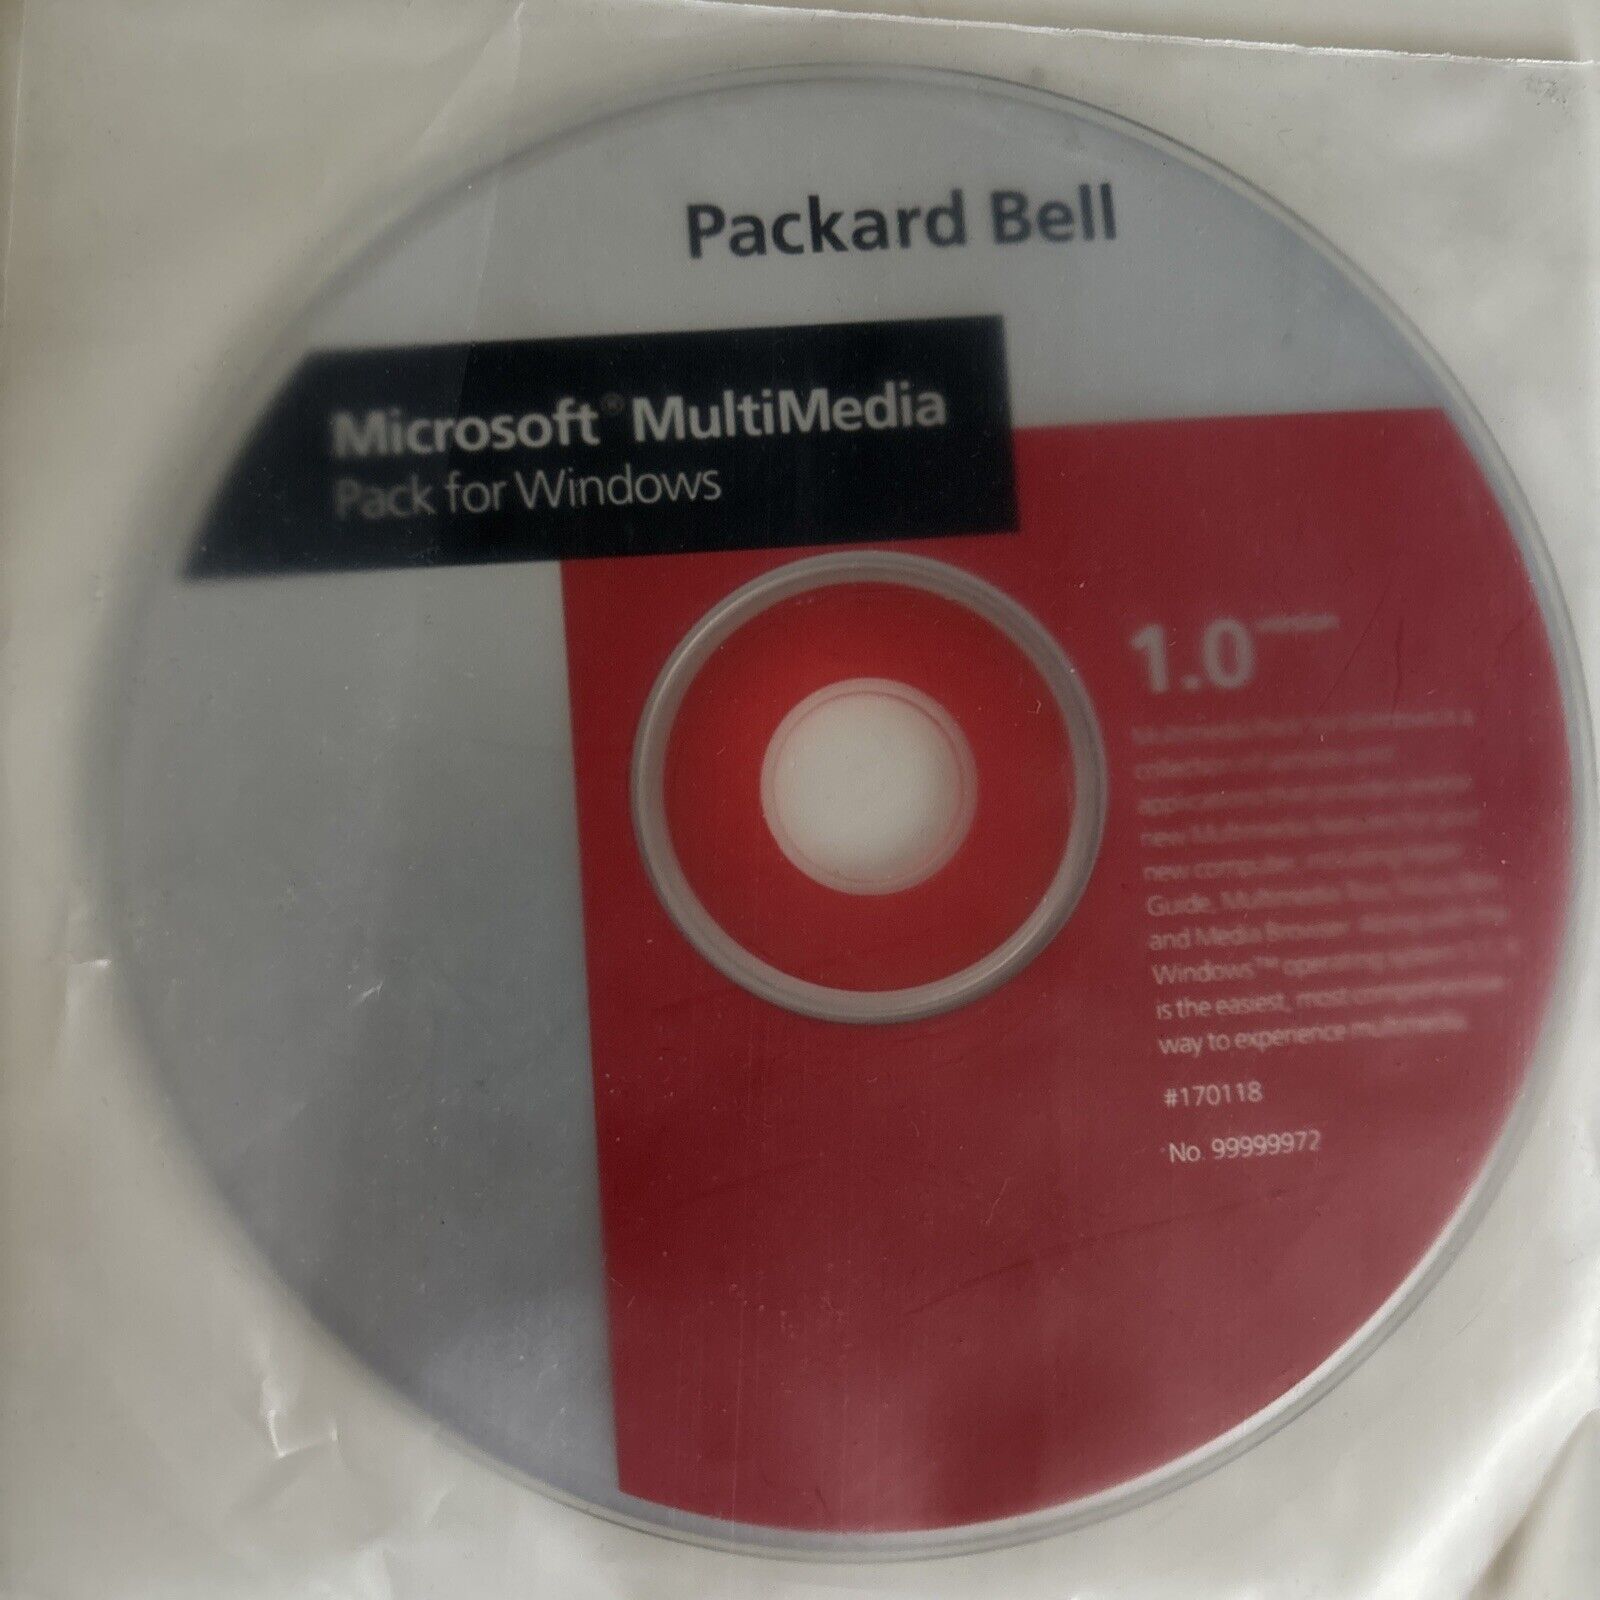 Packard Bell Microsoft MultiMedia Packet for Windows 1.0 CD-ROM Disc Only